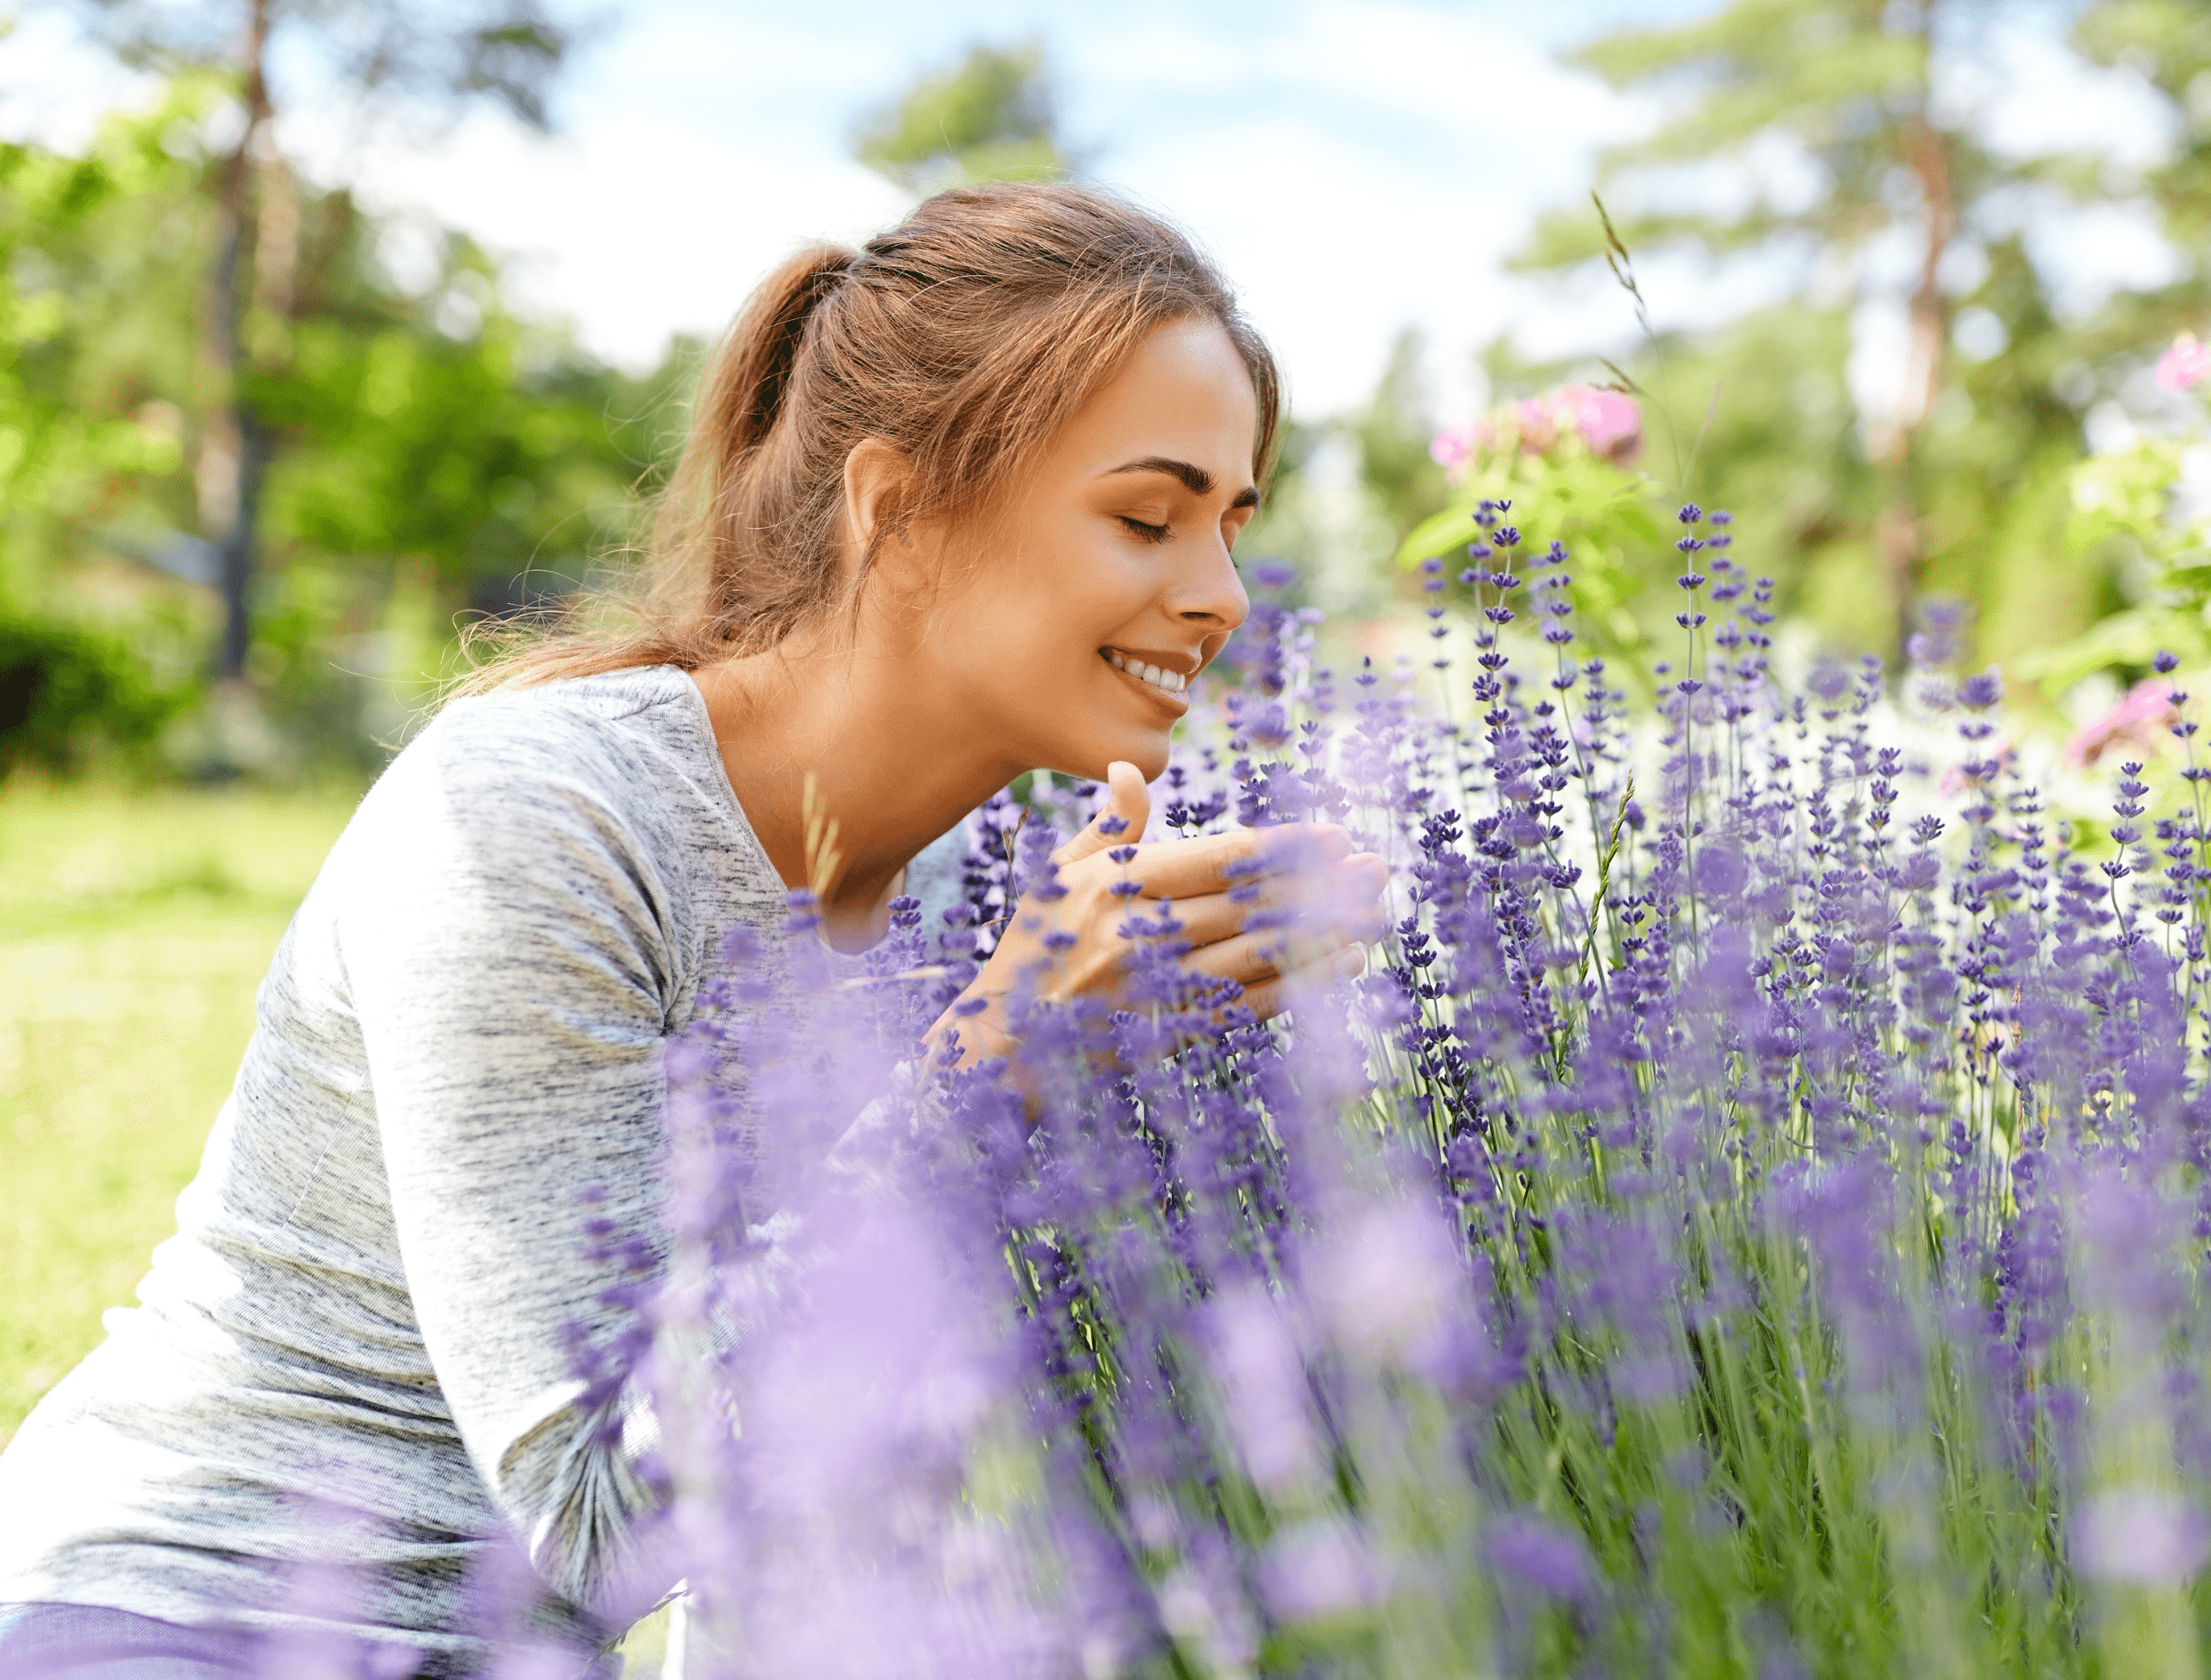 Young Woman Smelling Lavender Flowers in Garden